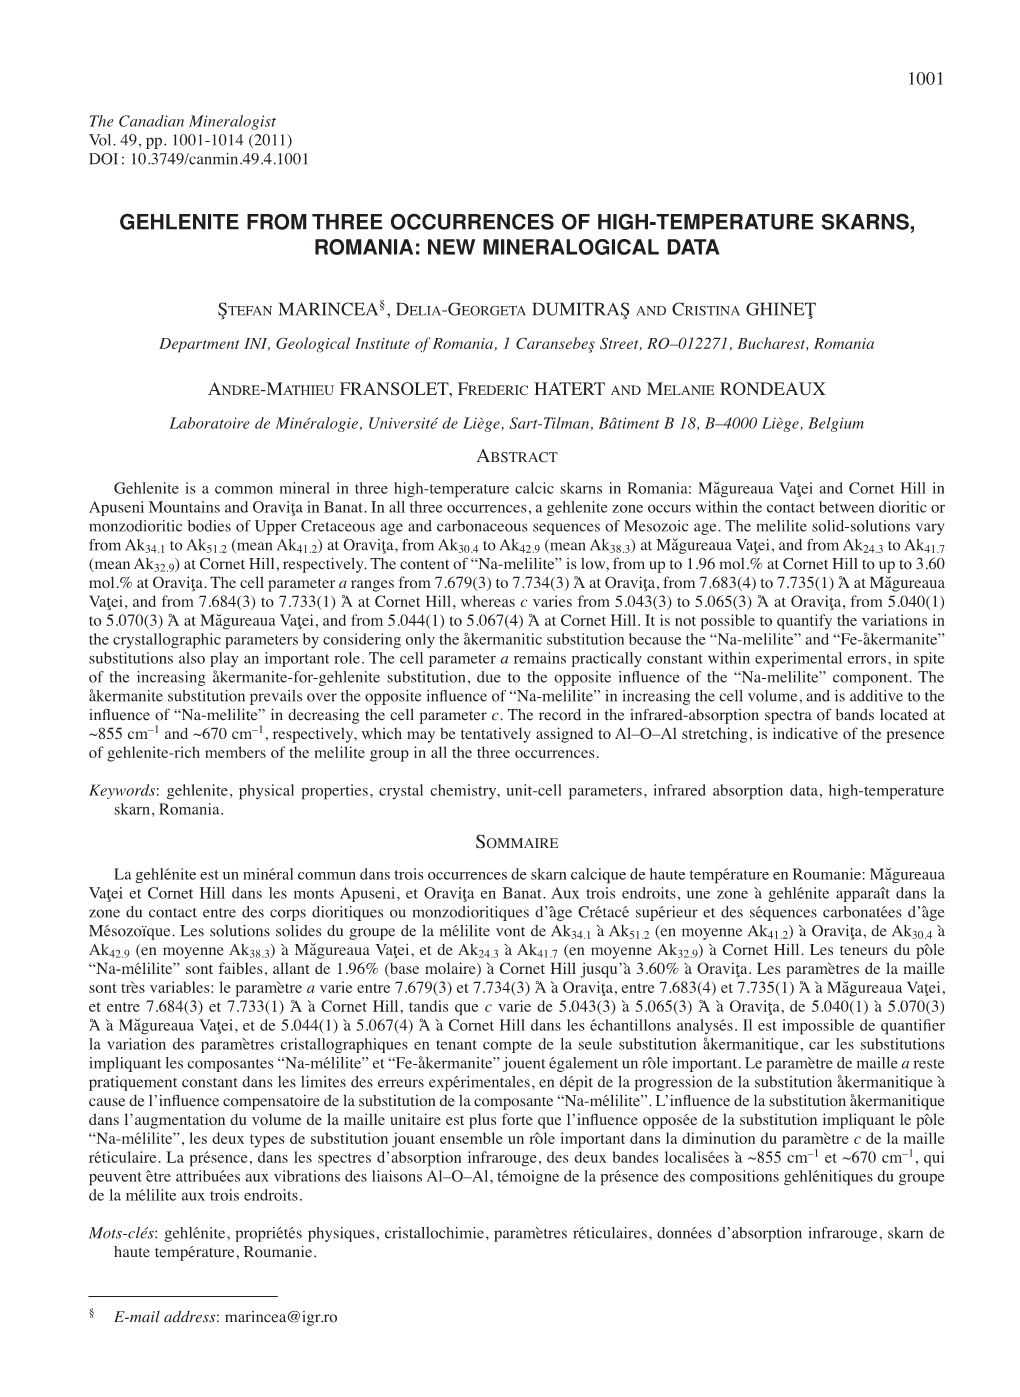 Gehlenite from Three Occurrences of High-Temperature Skarns, Romania: New Mineralogical Data